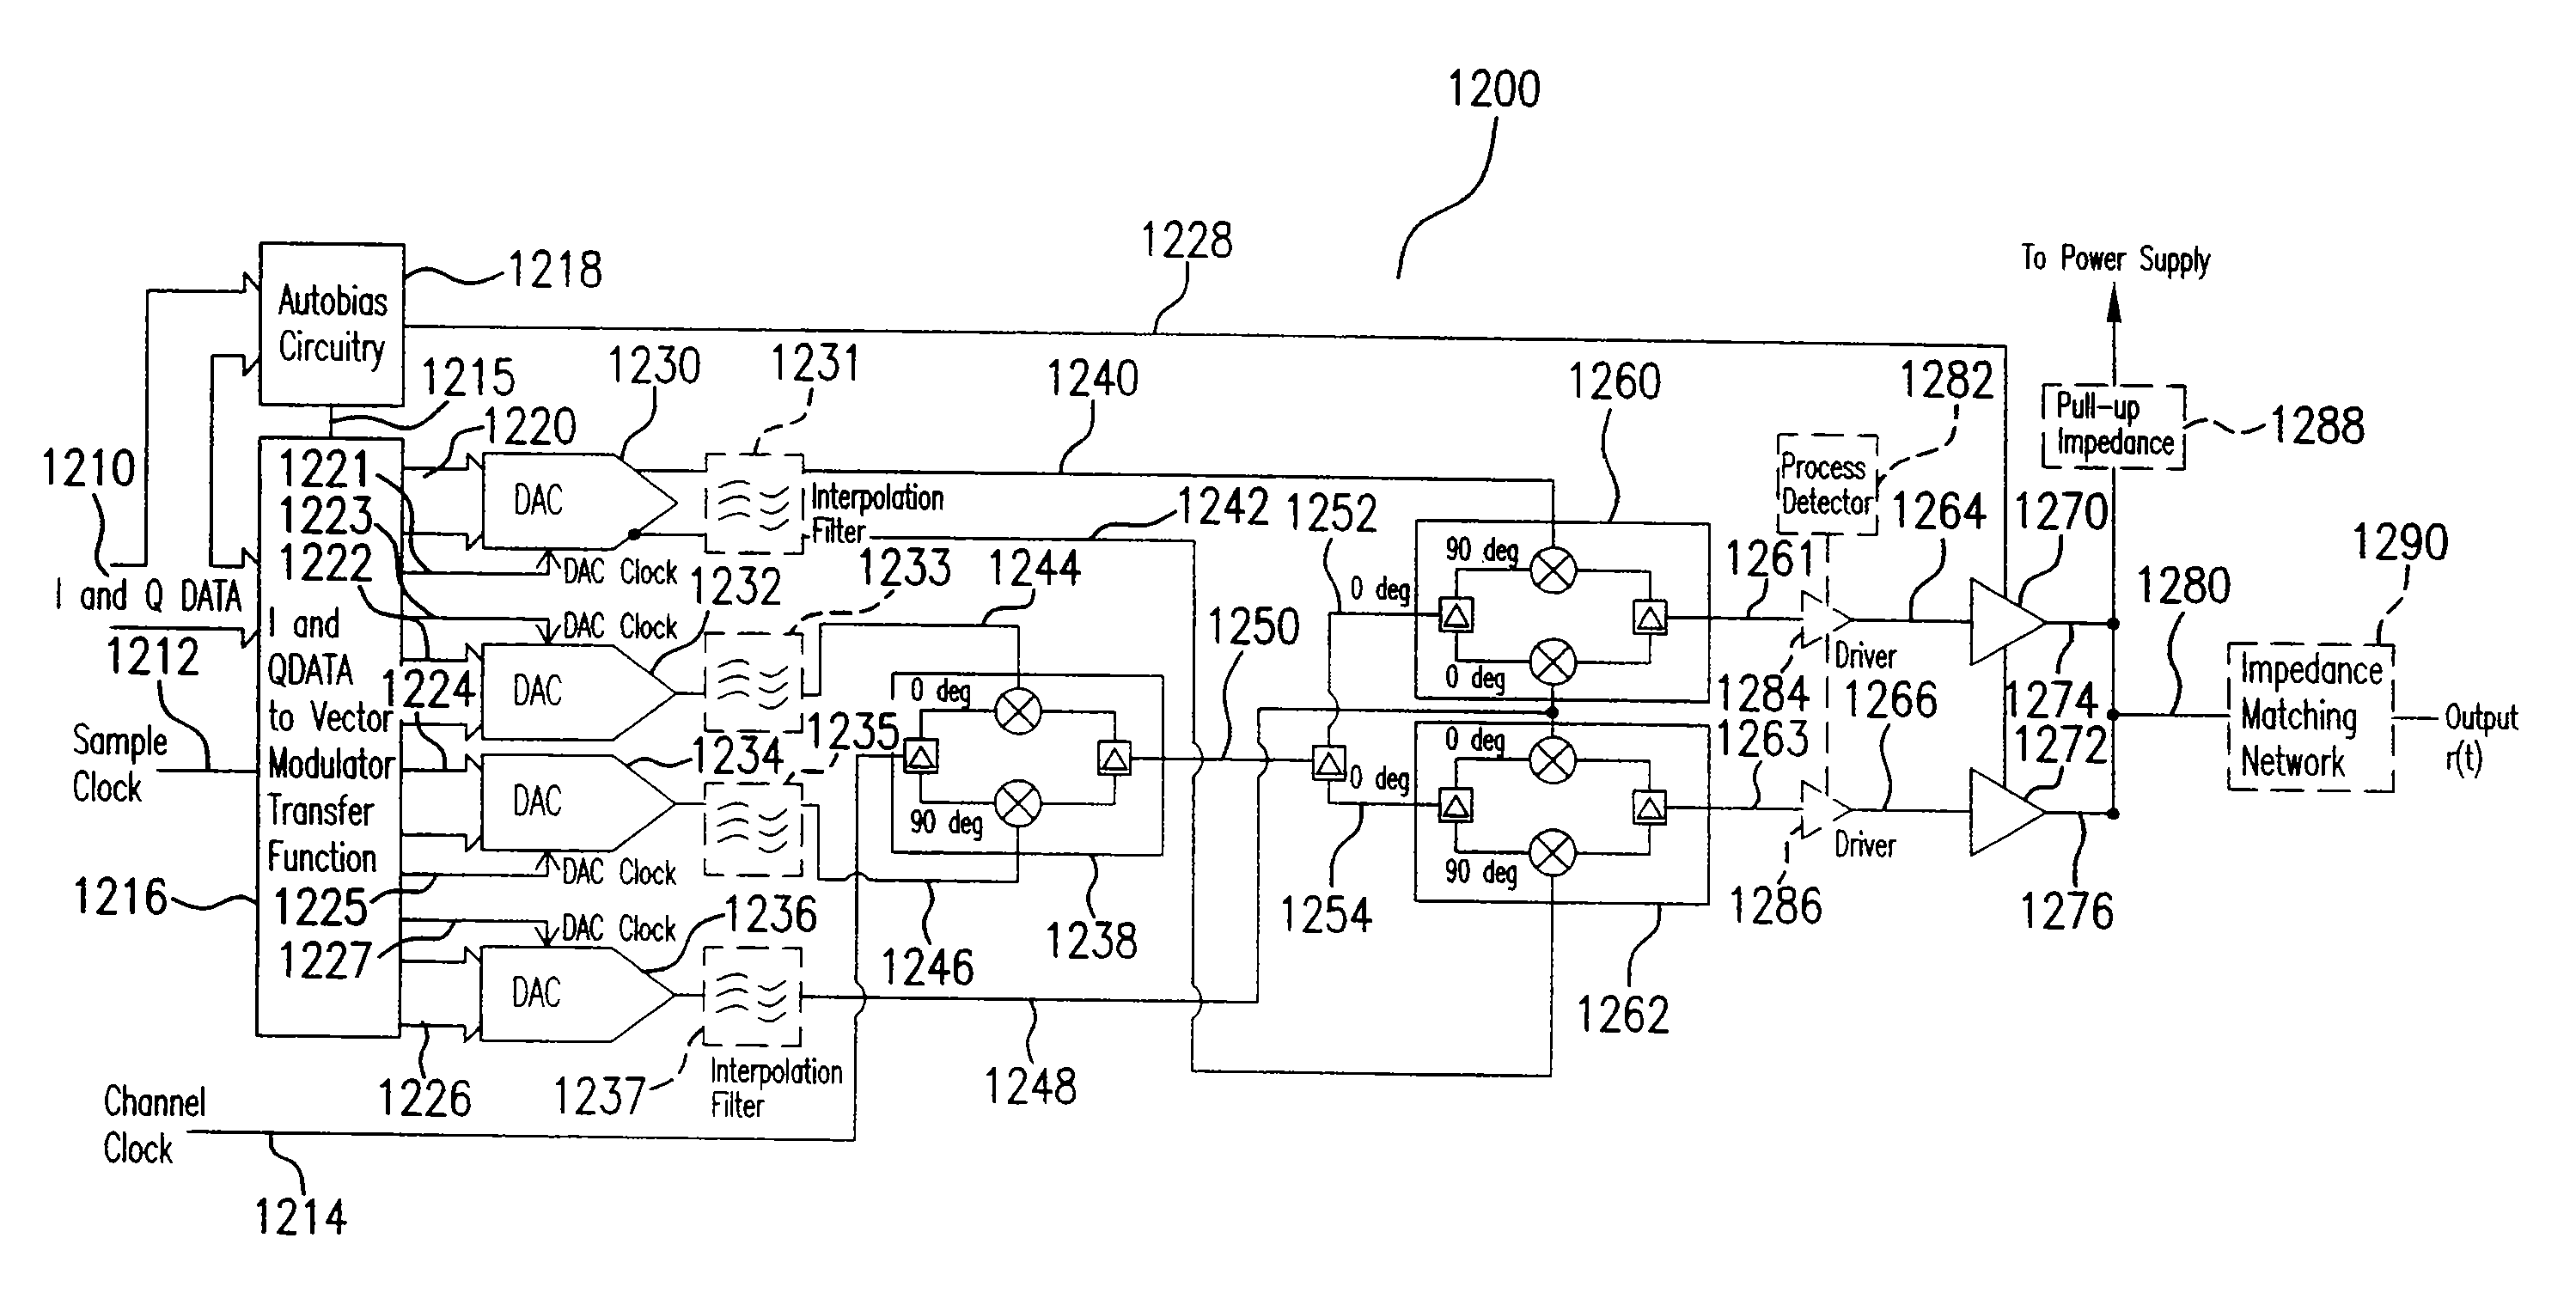 RF power transmission, modulation, and amplification, including embodiments for generating vector modulation control signals